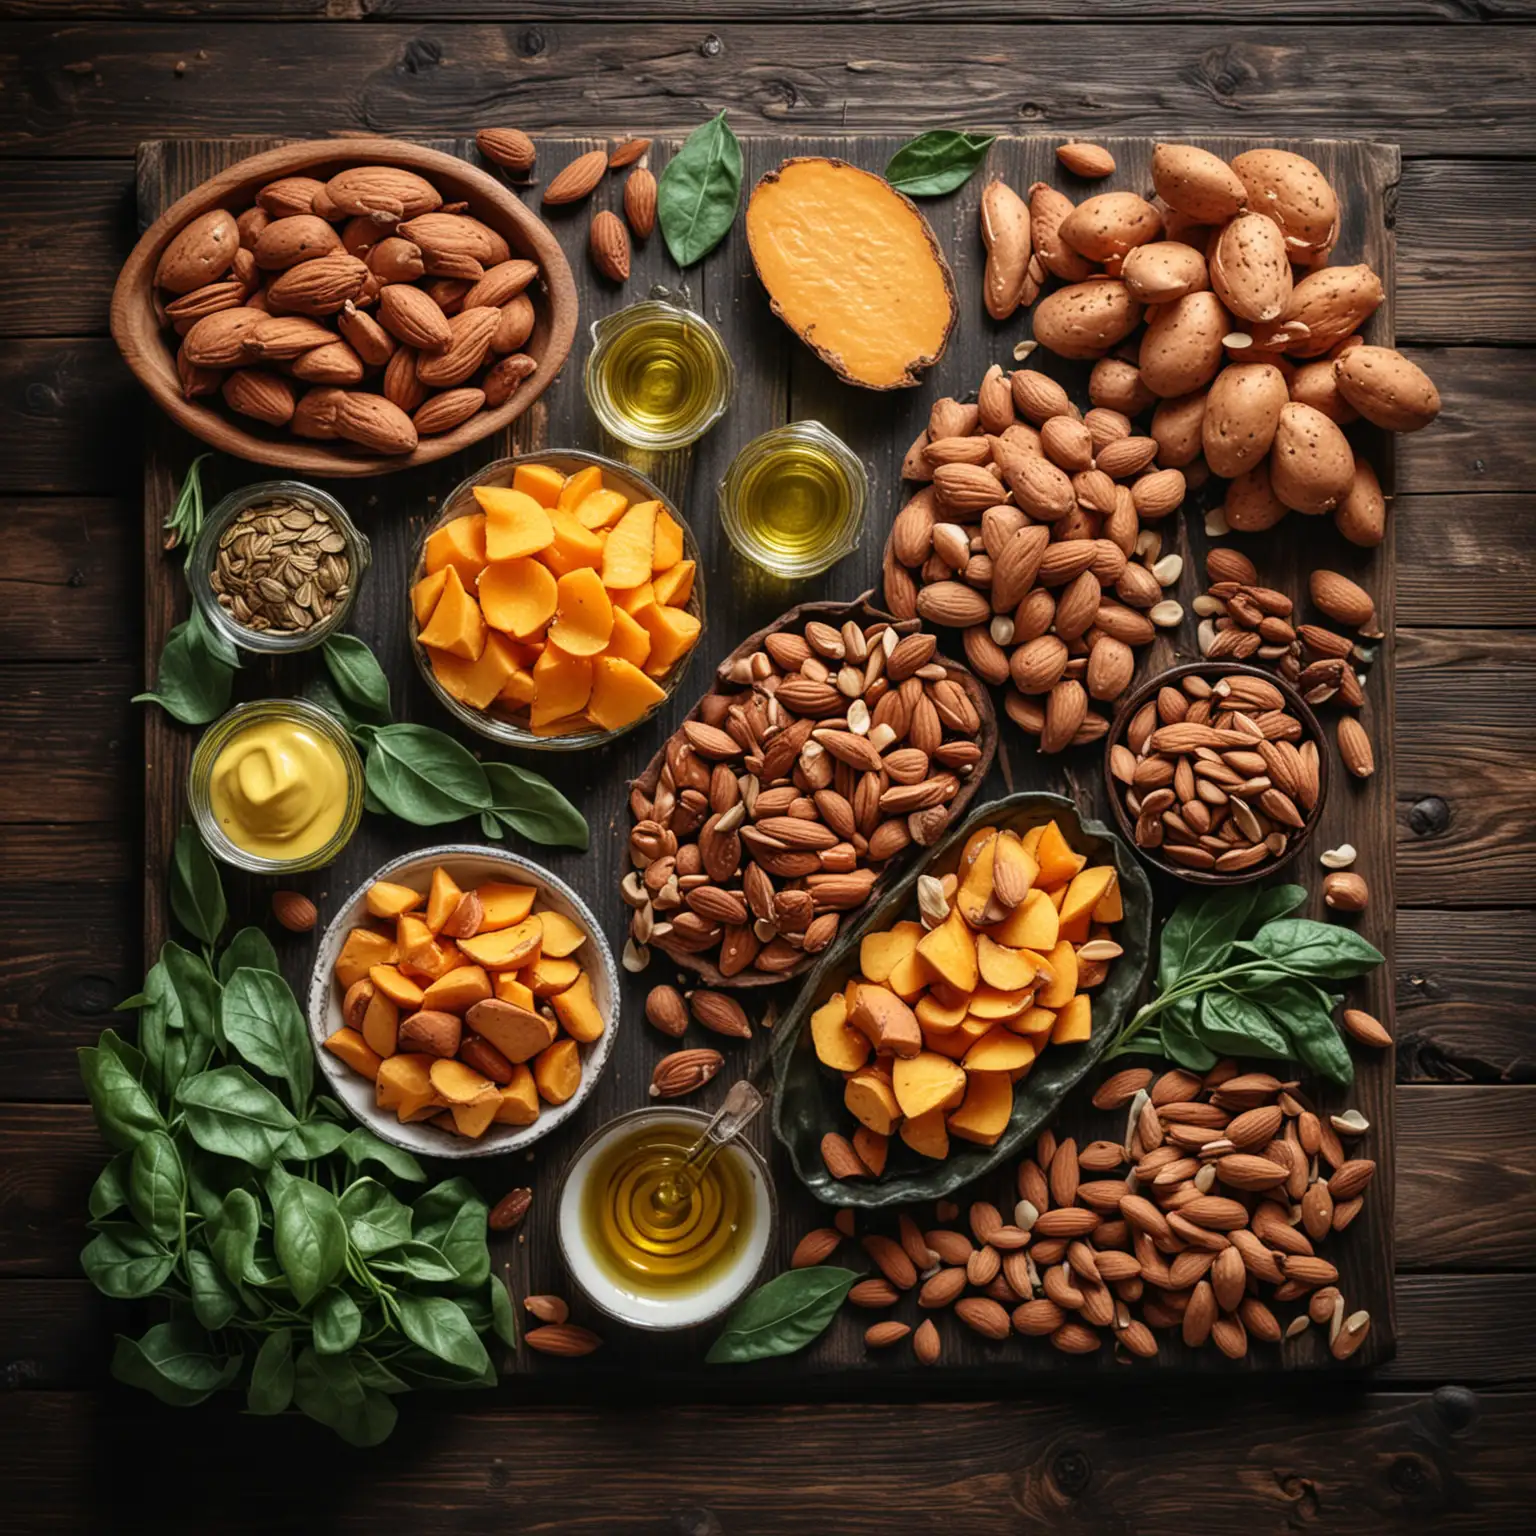 Gourmet Presentation Delectable Spread of Almonds Spinach Plant Oils and Sweet Potatoes on Rustic Wooden Table